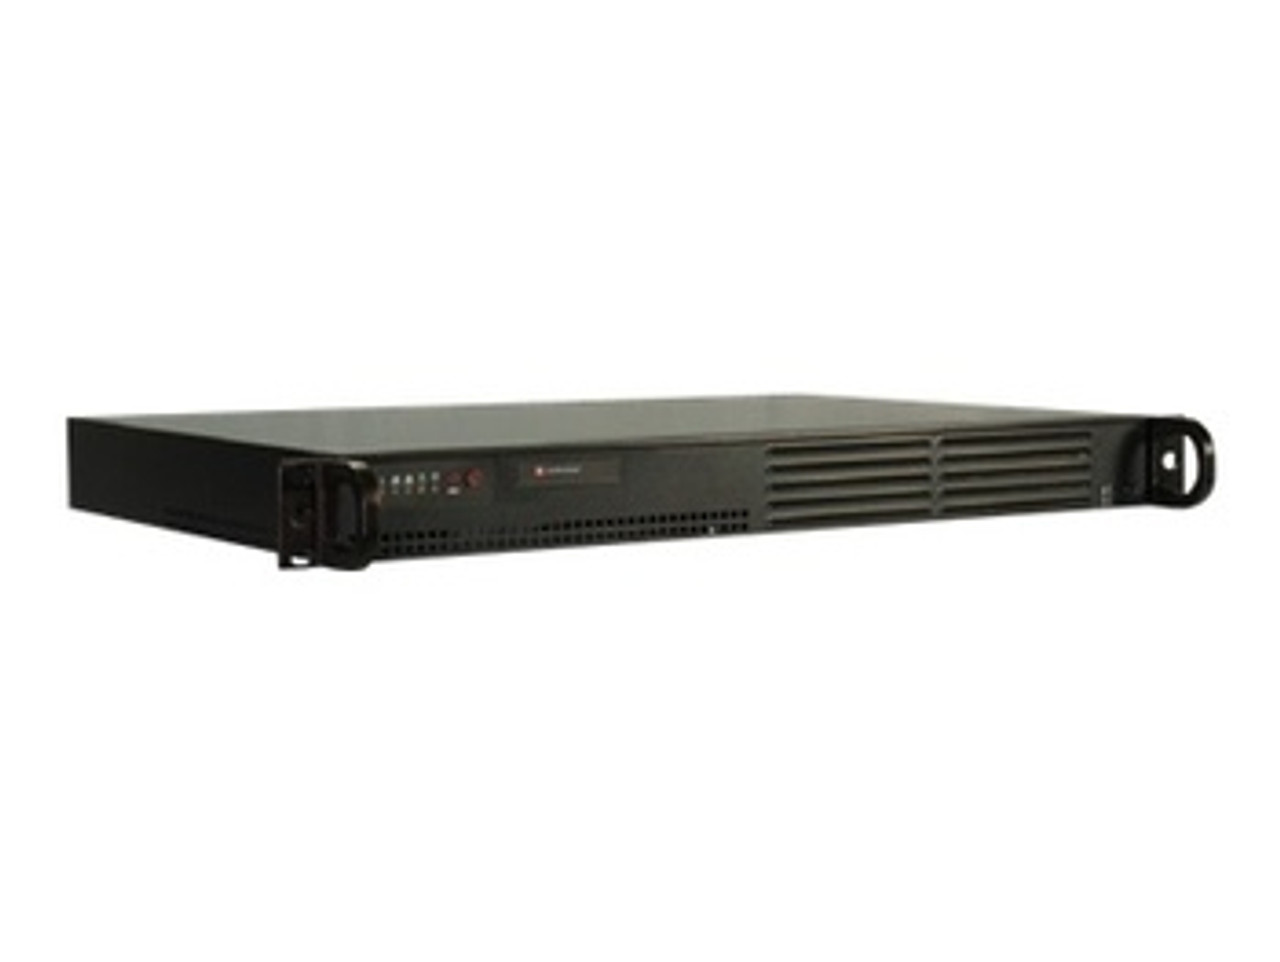 WS-C25 Enterasys C25 WLAN Controller Manages 16 Access Points Expandable to 48 with 16 AP Capacity Upgrade